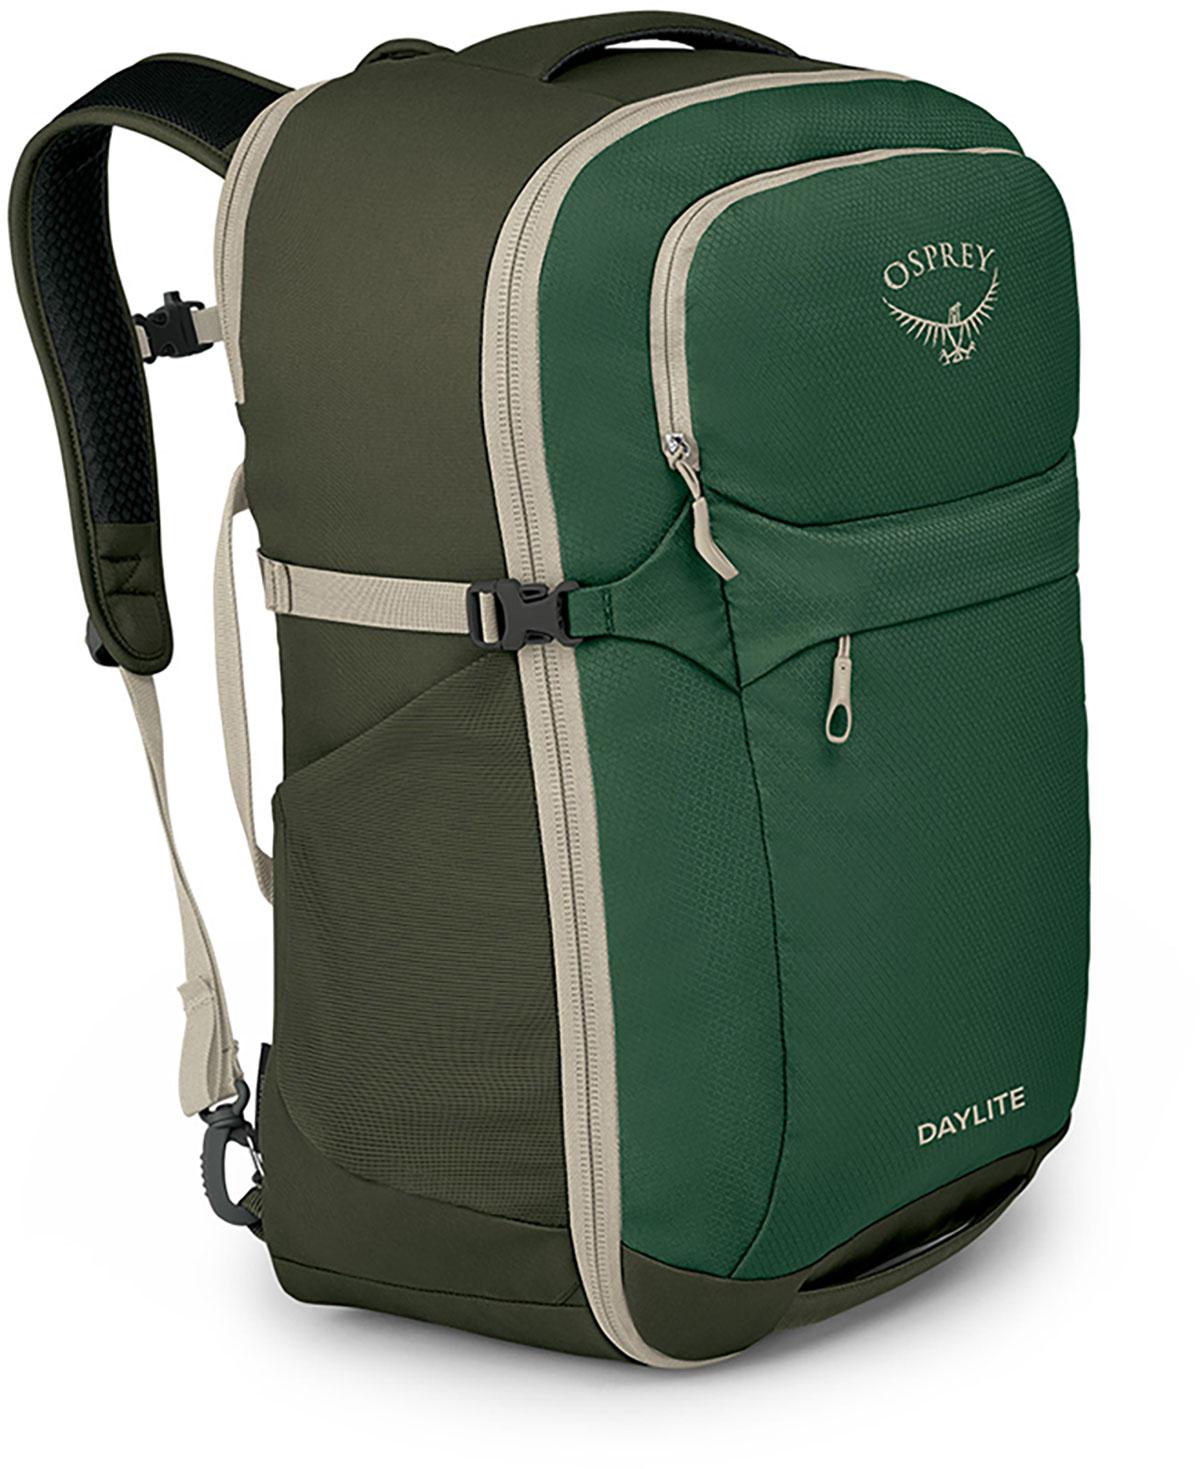 Osprey Daylite Carry-on Travel Pack 44 - Green Canopy/green Creek